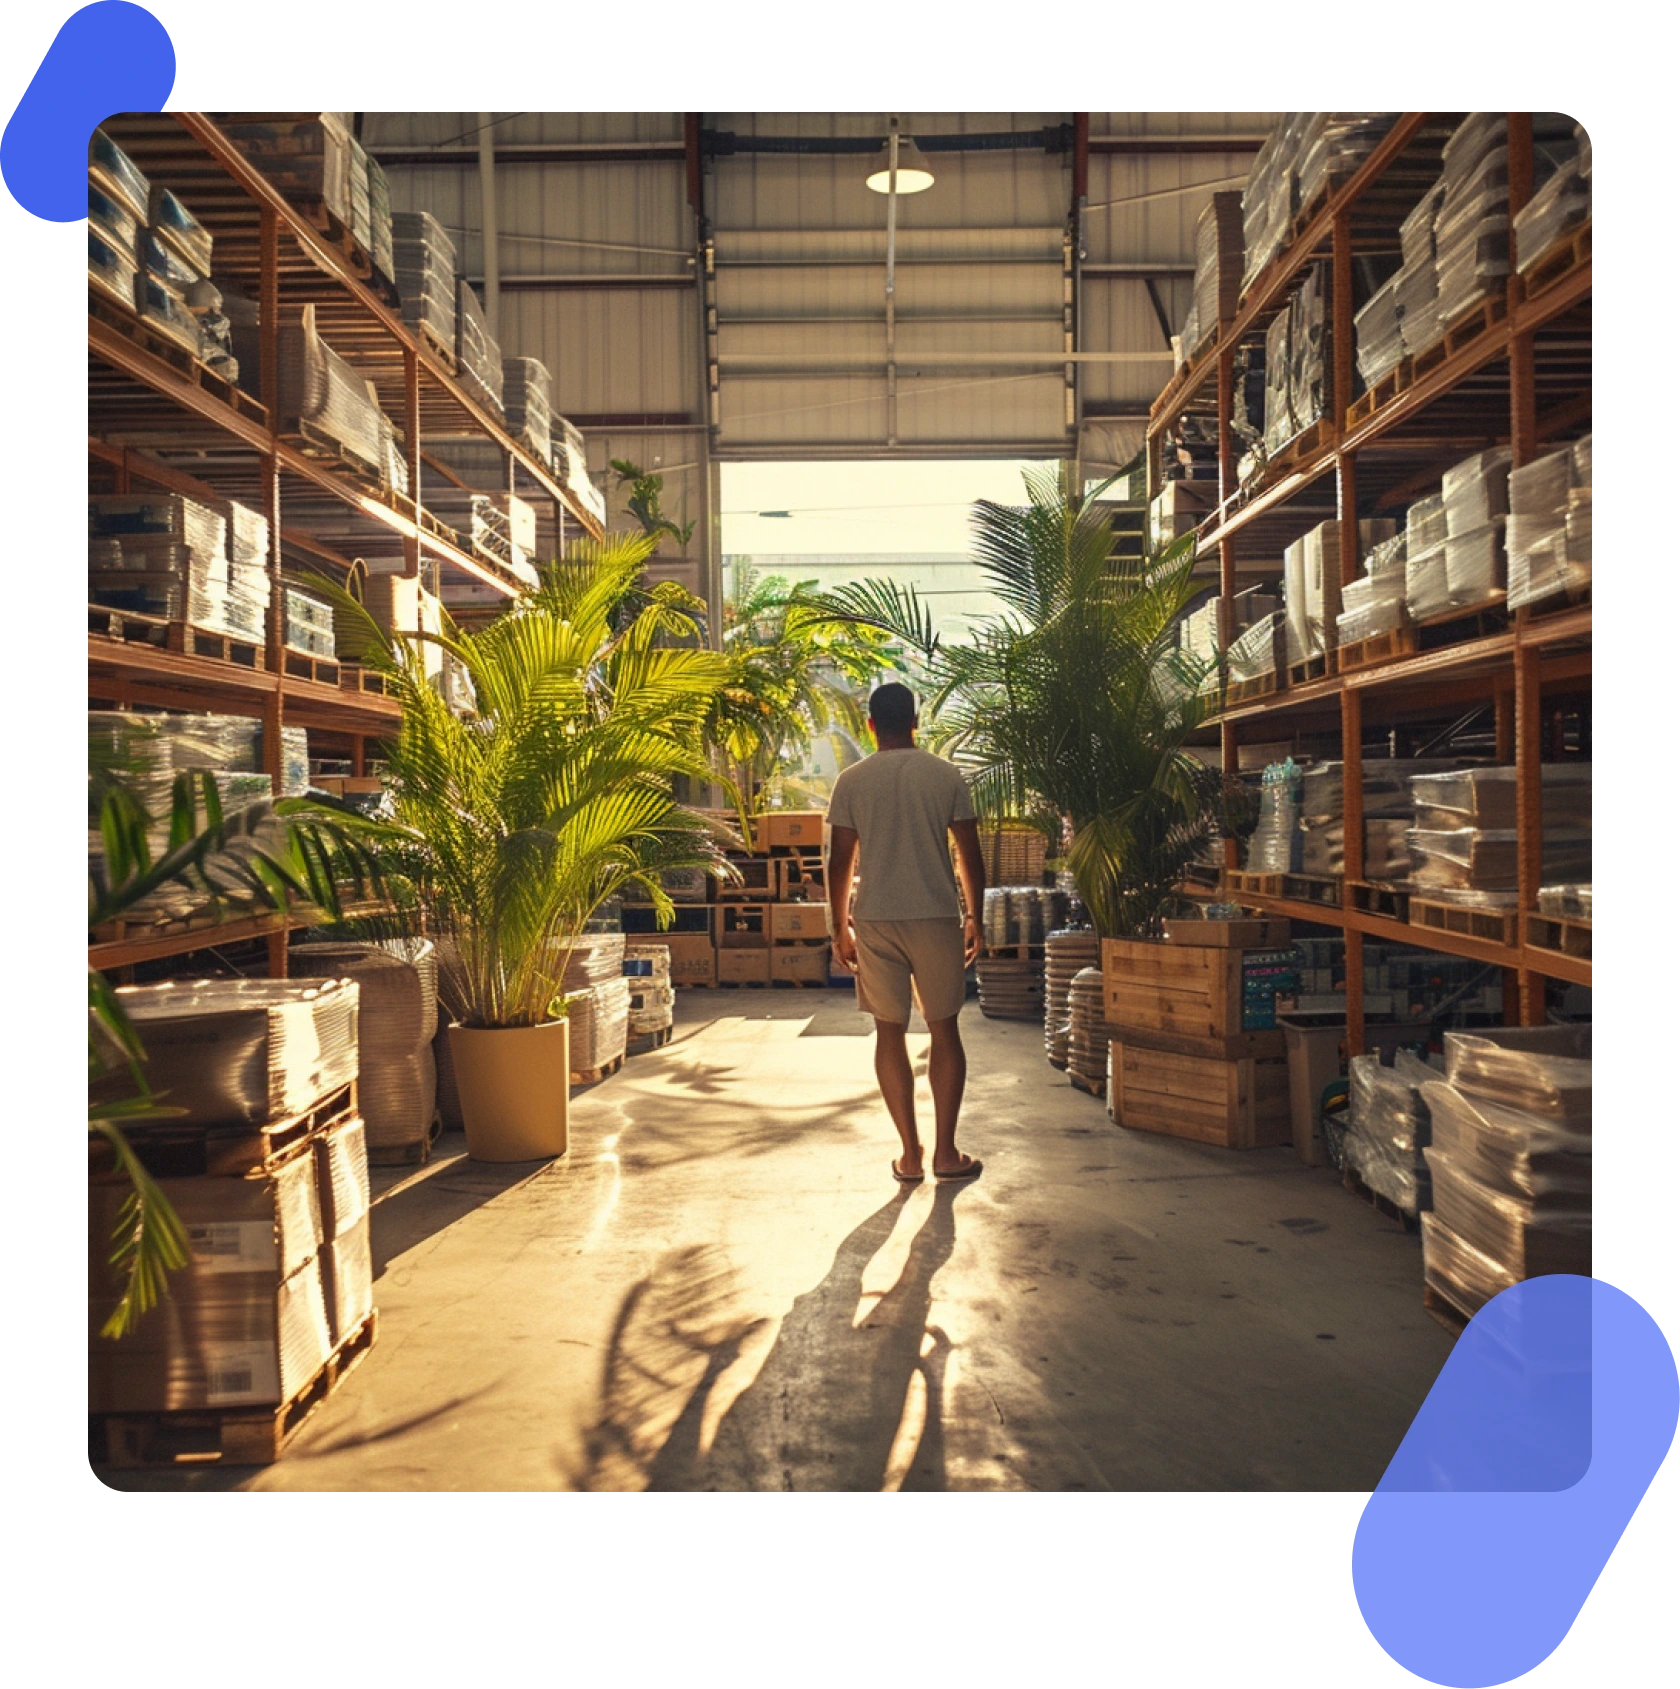 Photo of a man in a warehouse workplace, surrounded by shelves and engaging in tasks related to inventory or logistics.